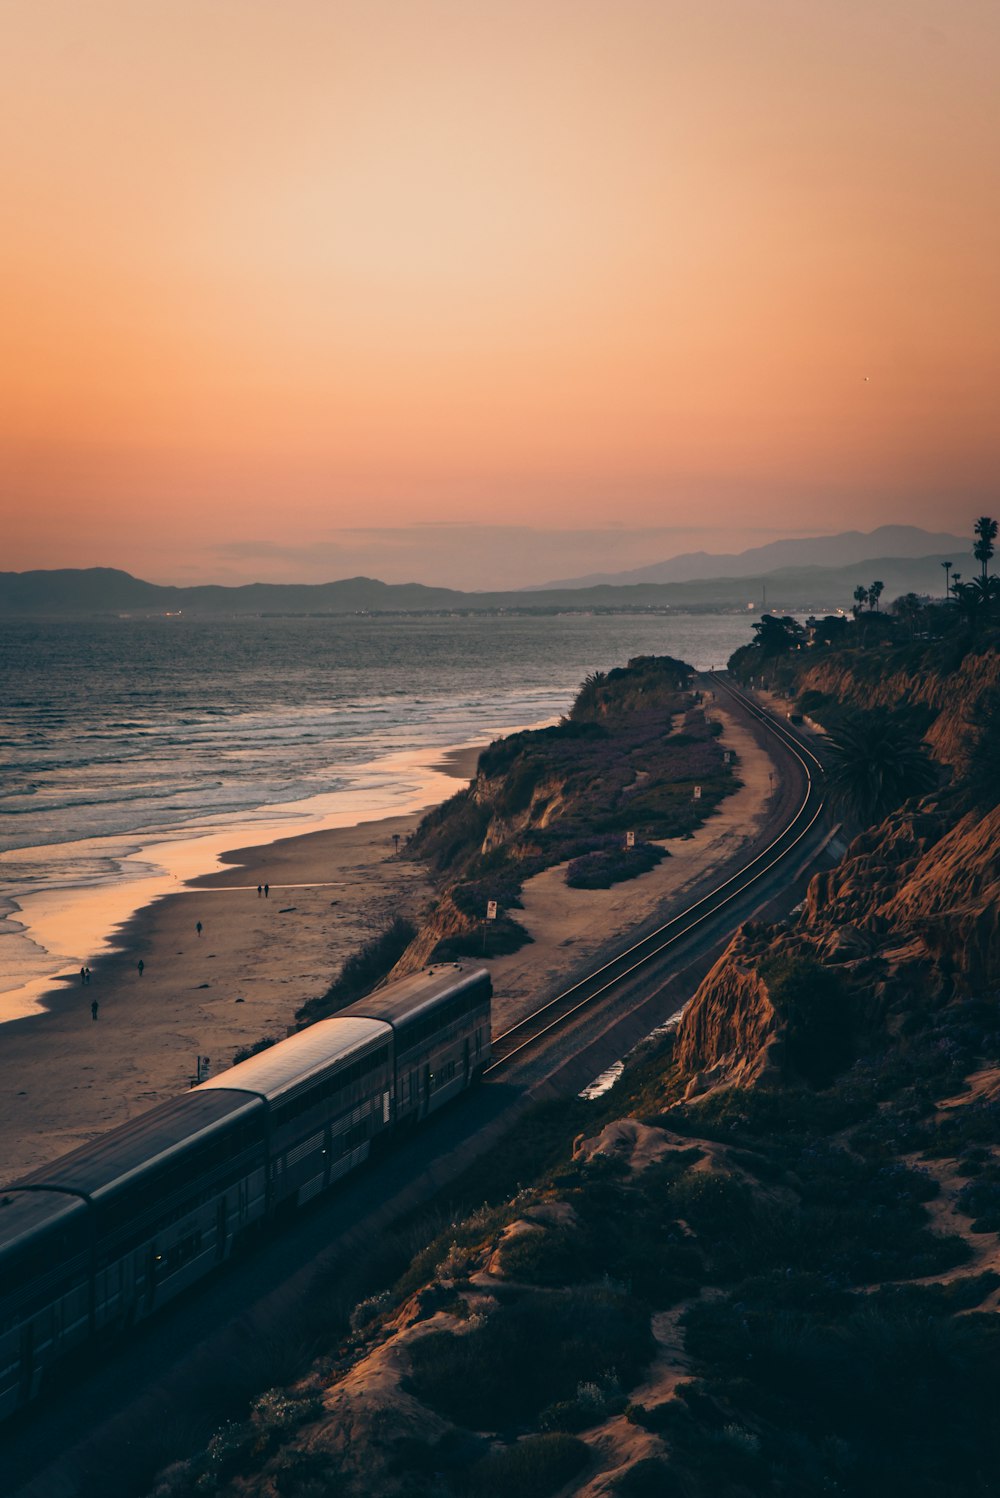 white and black train on rail near body of water during sunset